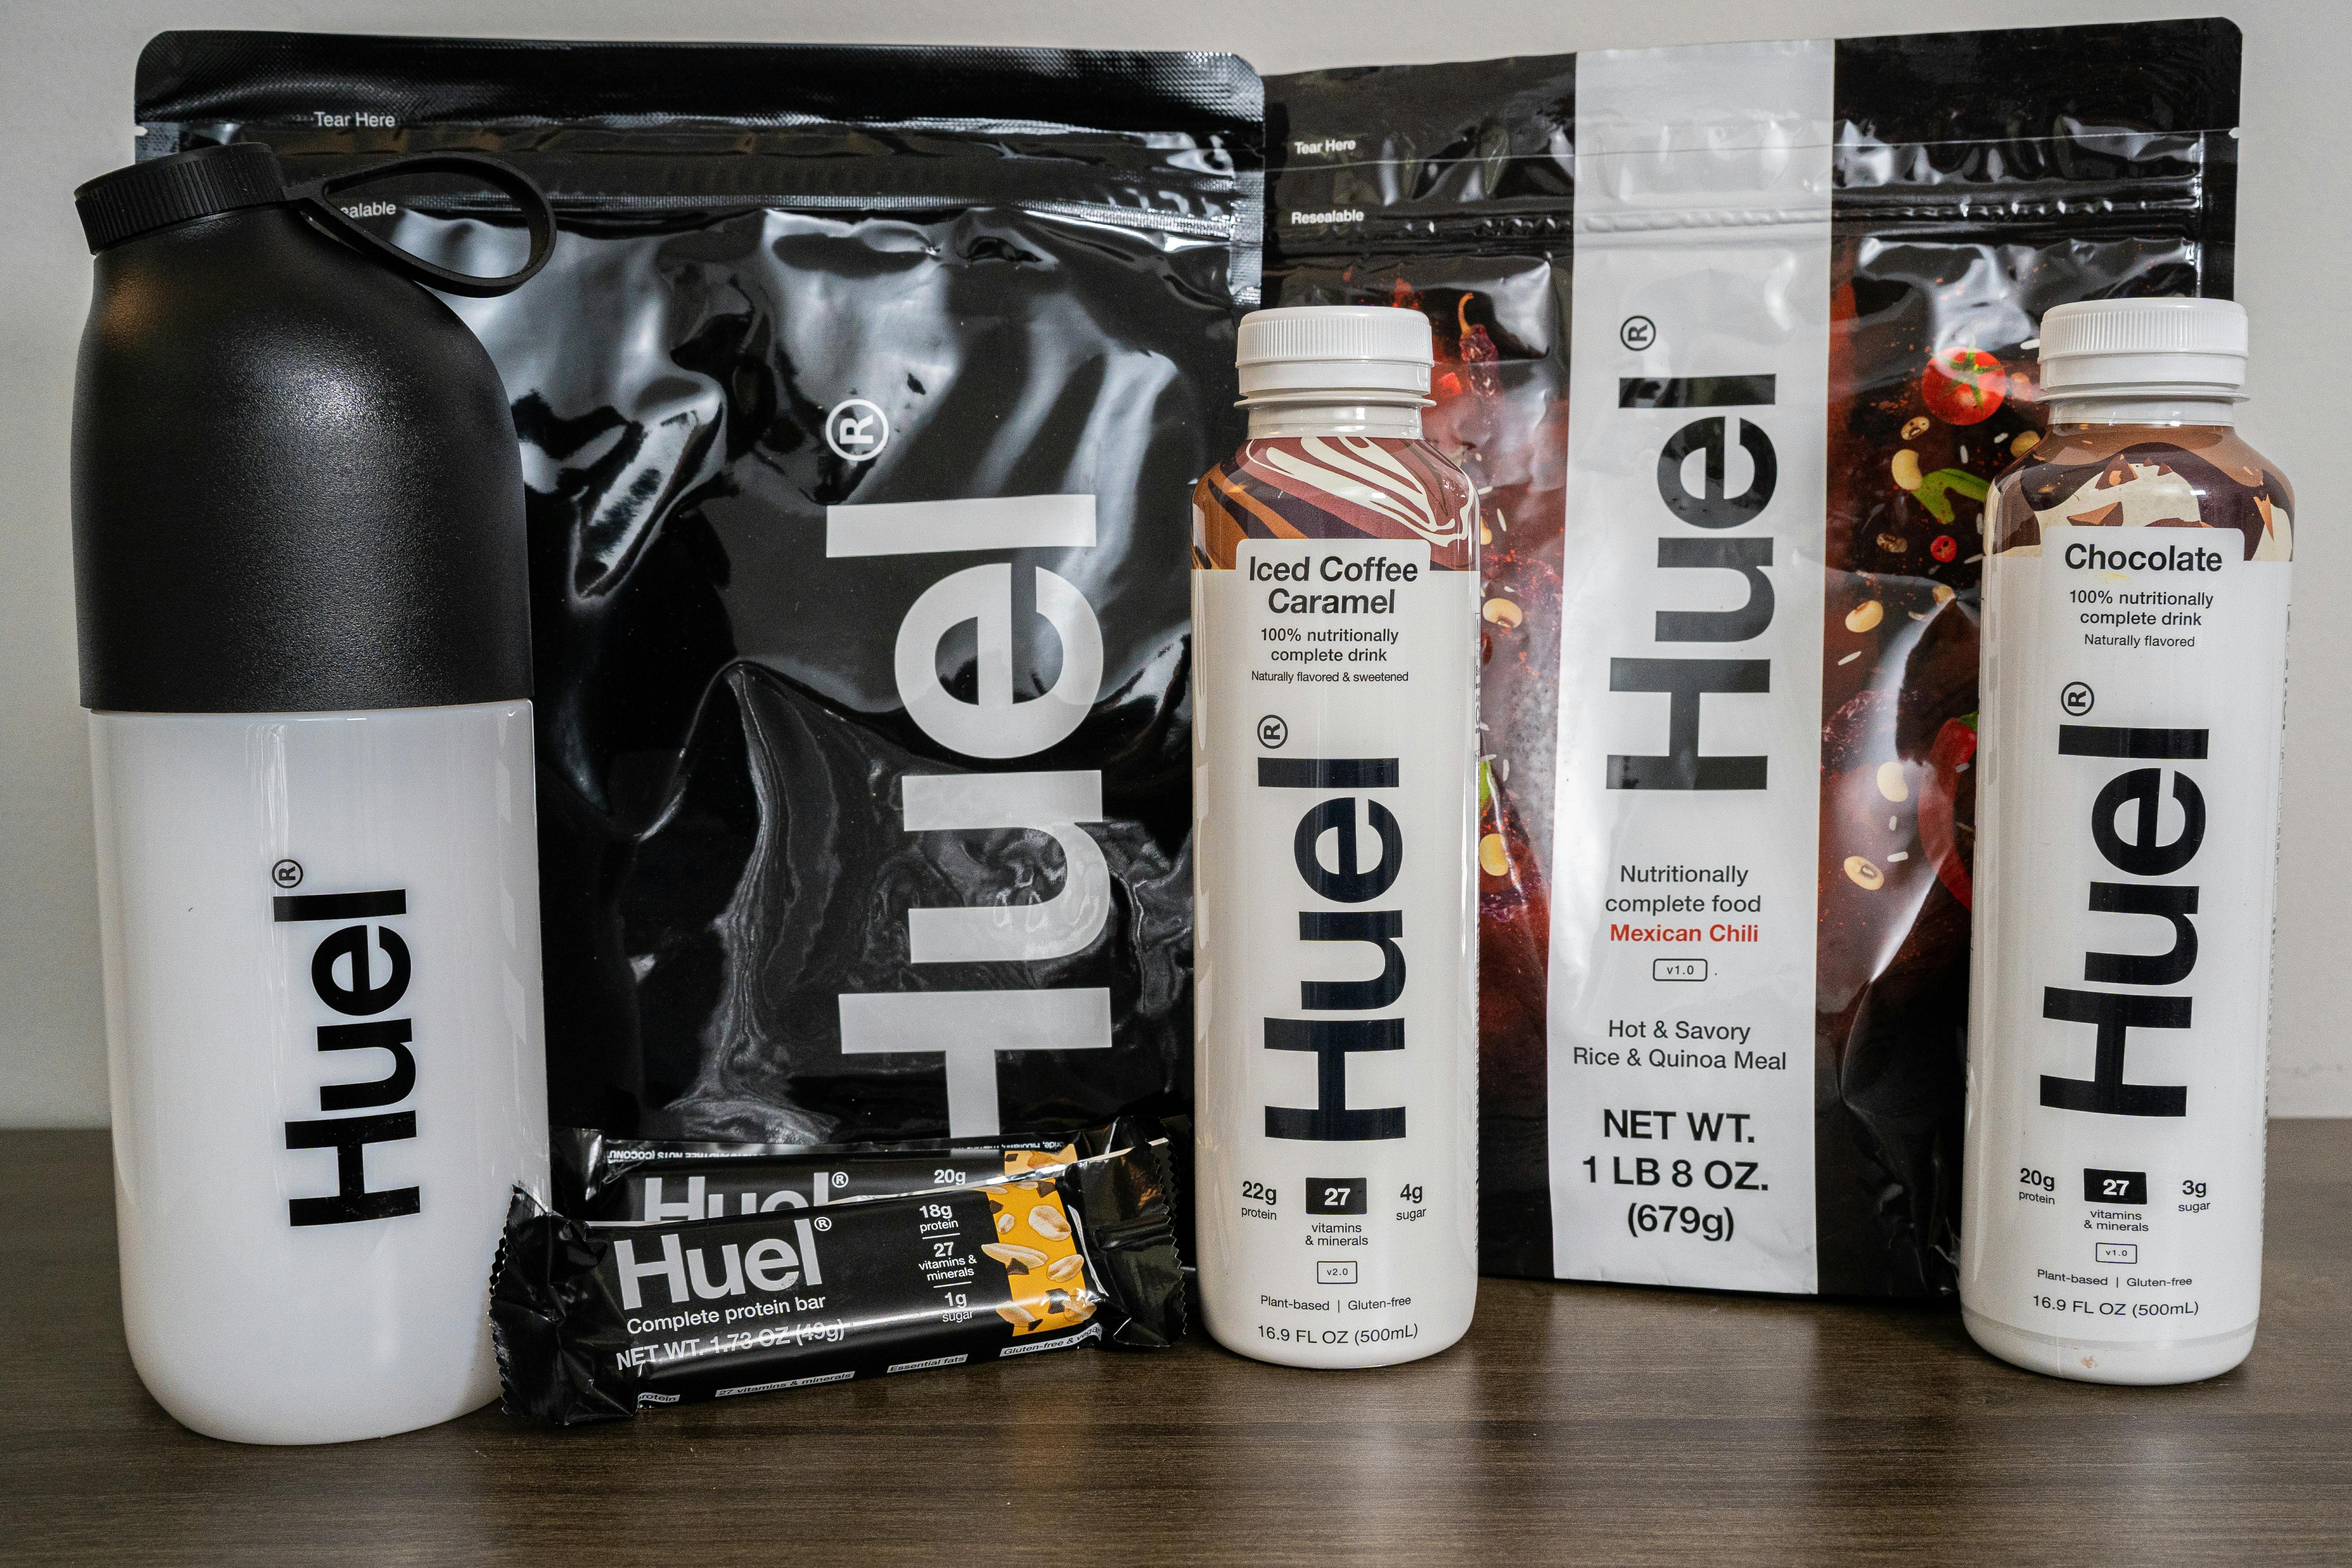 https://innerbody.imgix.net/huel-product-review.jpeg